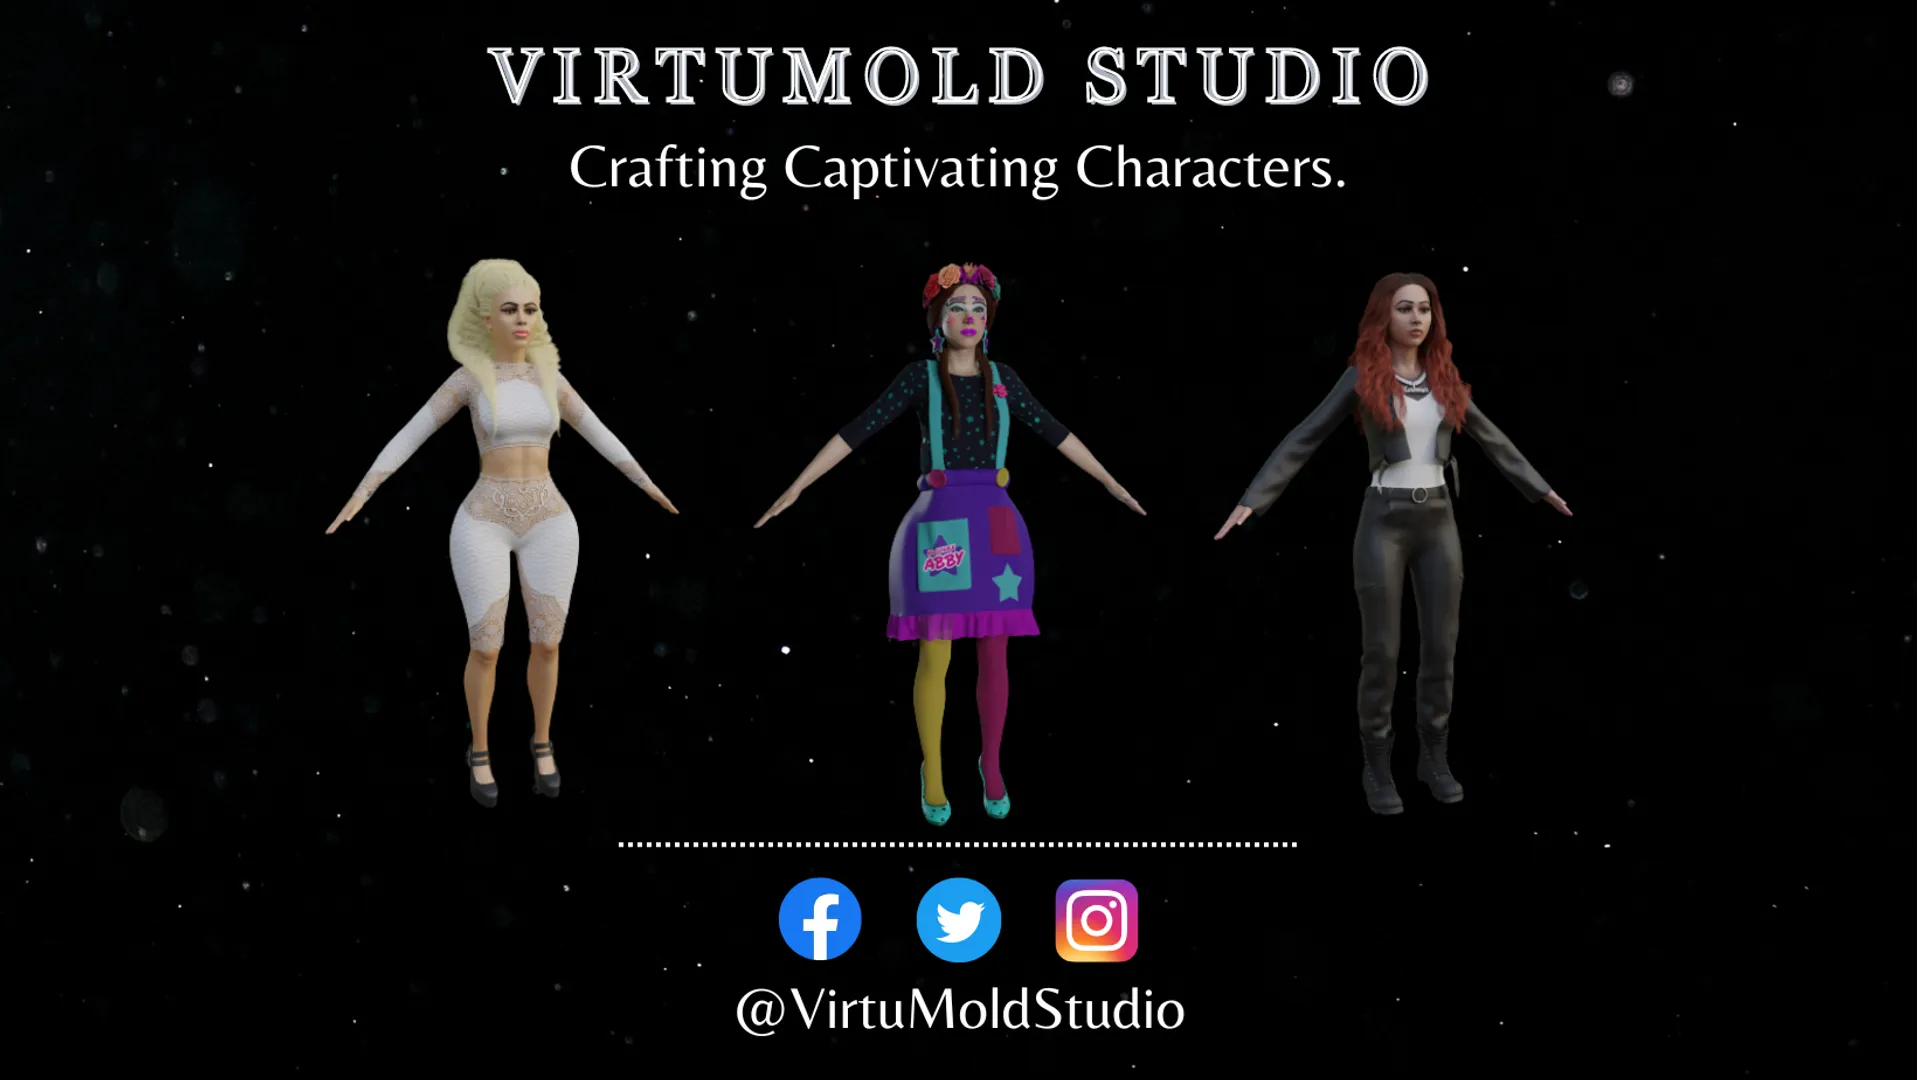 Good day, everyone! It gives me great pleasure to present you to VirtuMold Studio, a paradise for creativity where 3D character design brings ideas to life. 🎨✨

I started on this amazing journey to build VirtuMold Studio because I am a passionate fan of all things related to art and technology. This area is the result of my love for 3D character design also NFTs Art and my desire to provide fascinating characters to the public.

#VirtuMoldStudio #3DCharacterDesign #ArtisticJourney #ImaginationUnleashed  #gamer #storytelling